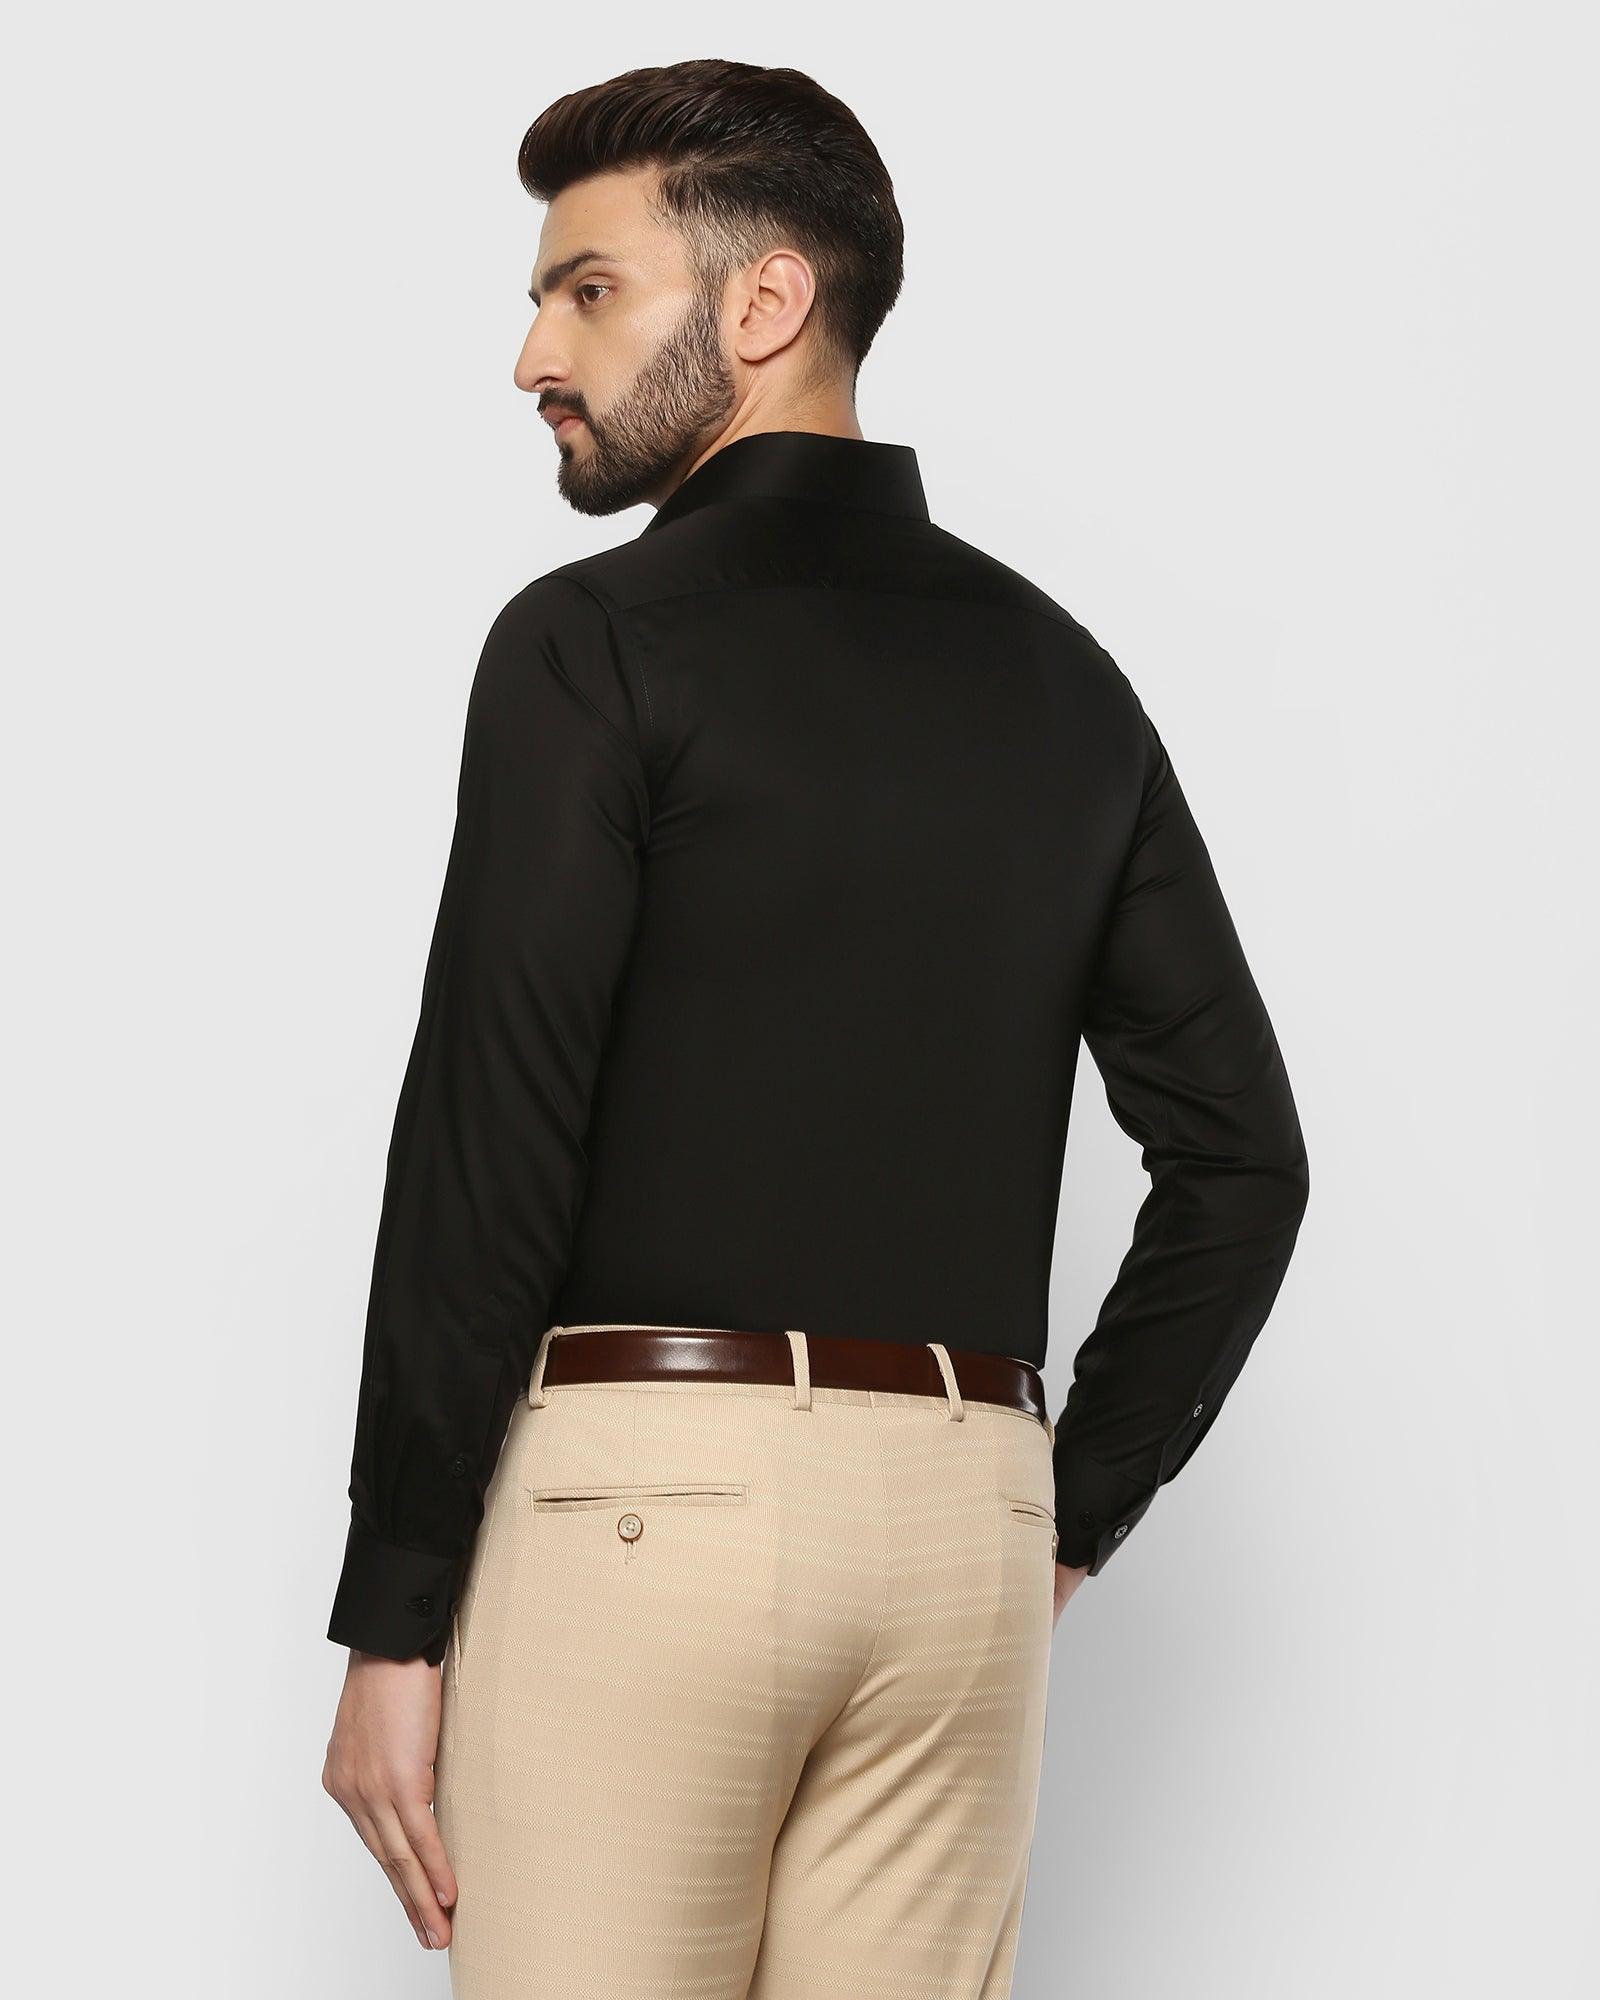 Man in black crew neck tshirt and brown pants sitting on gray concrete  wall photo  Free Man Image on Unsplash